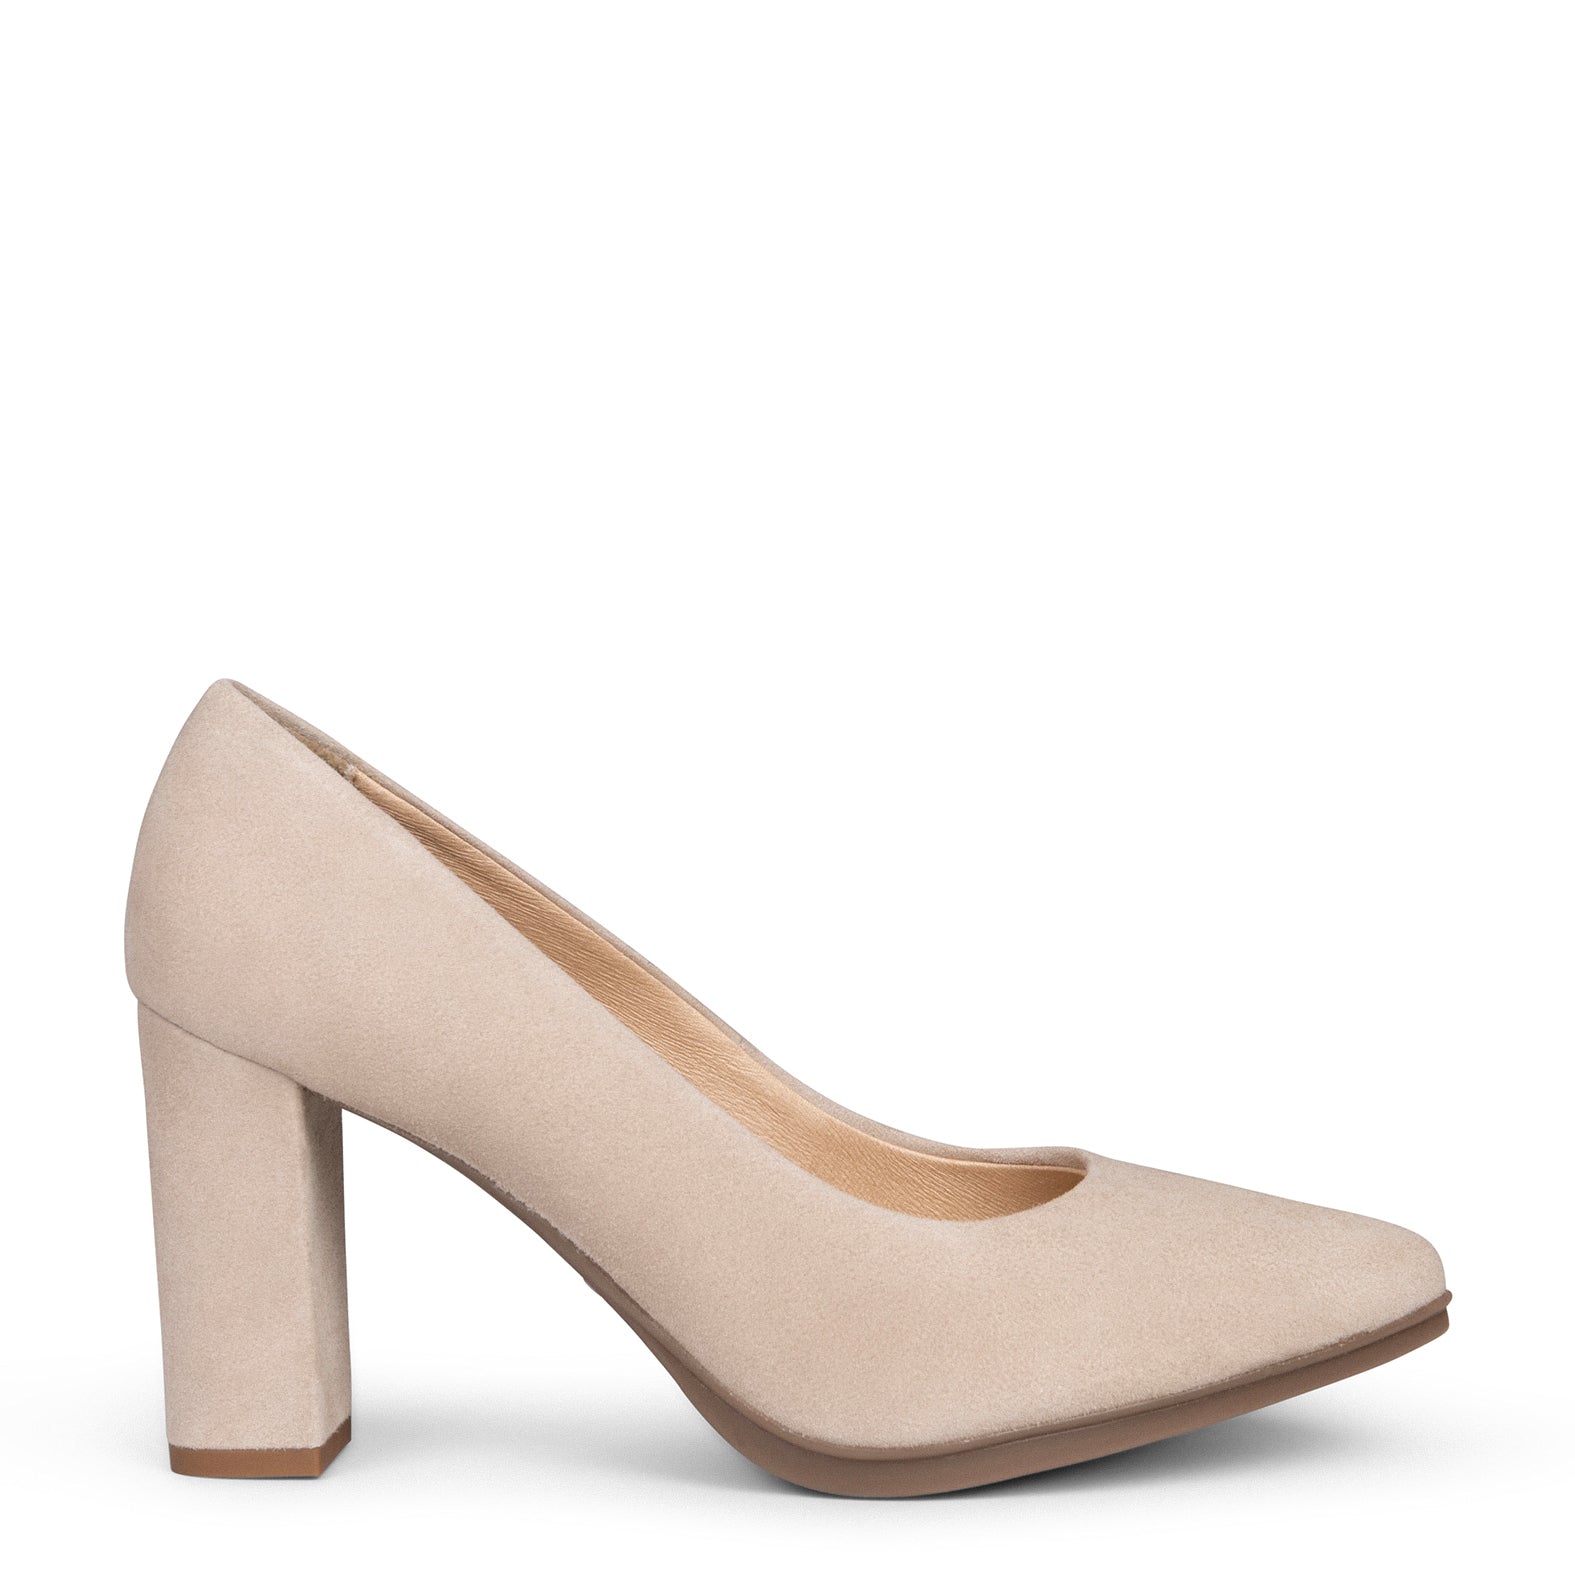 URBAN – SAND Suede high-heeled shoes 